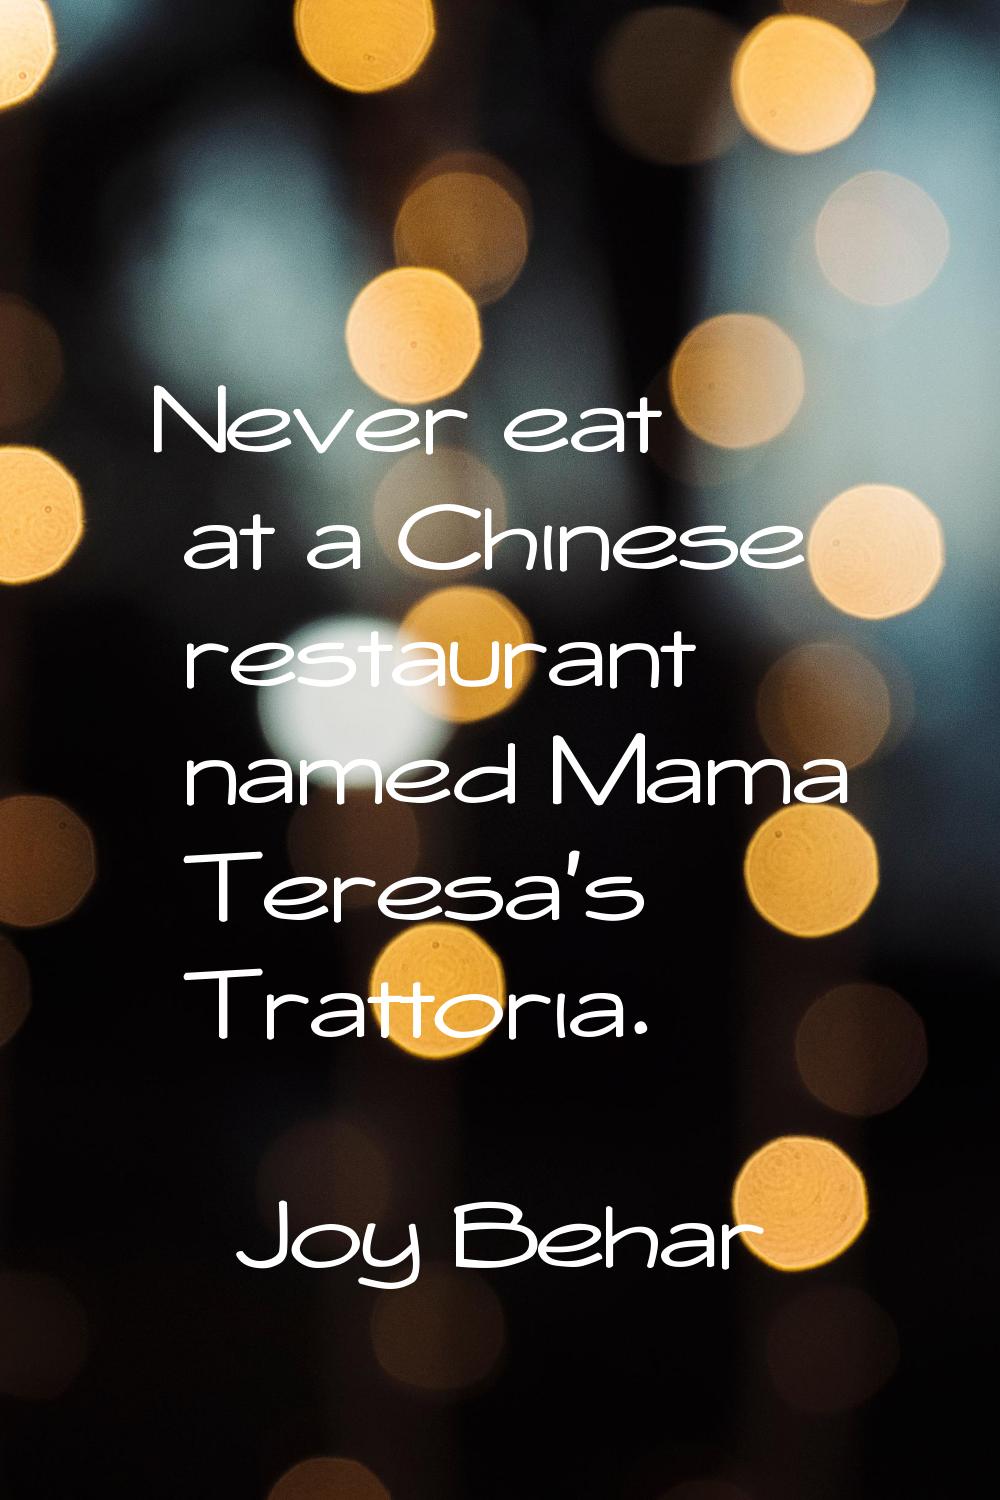 Never eat at a Chinese restaurant named Mama Teresa's Trattoria.